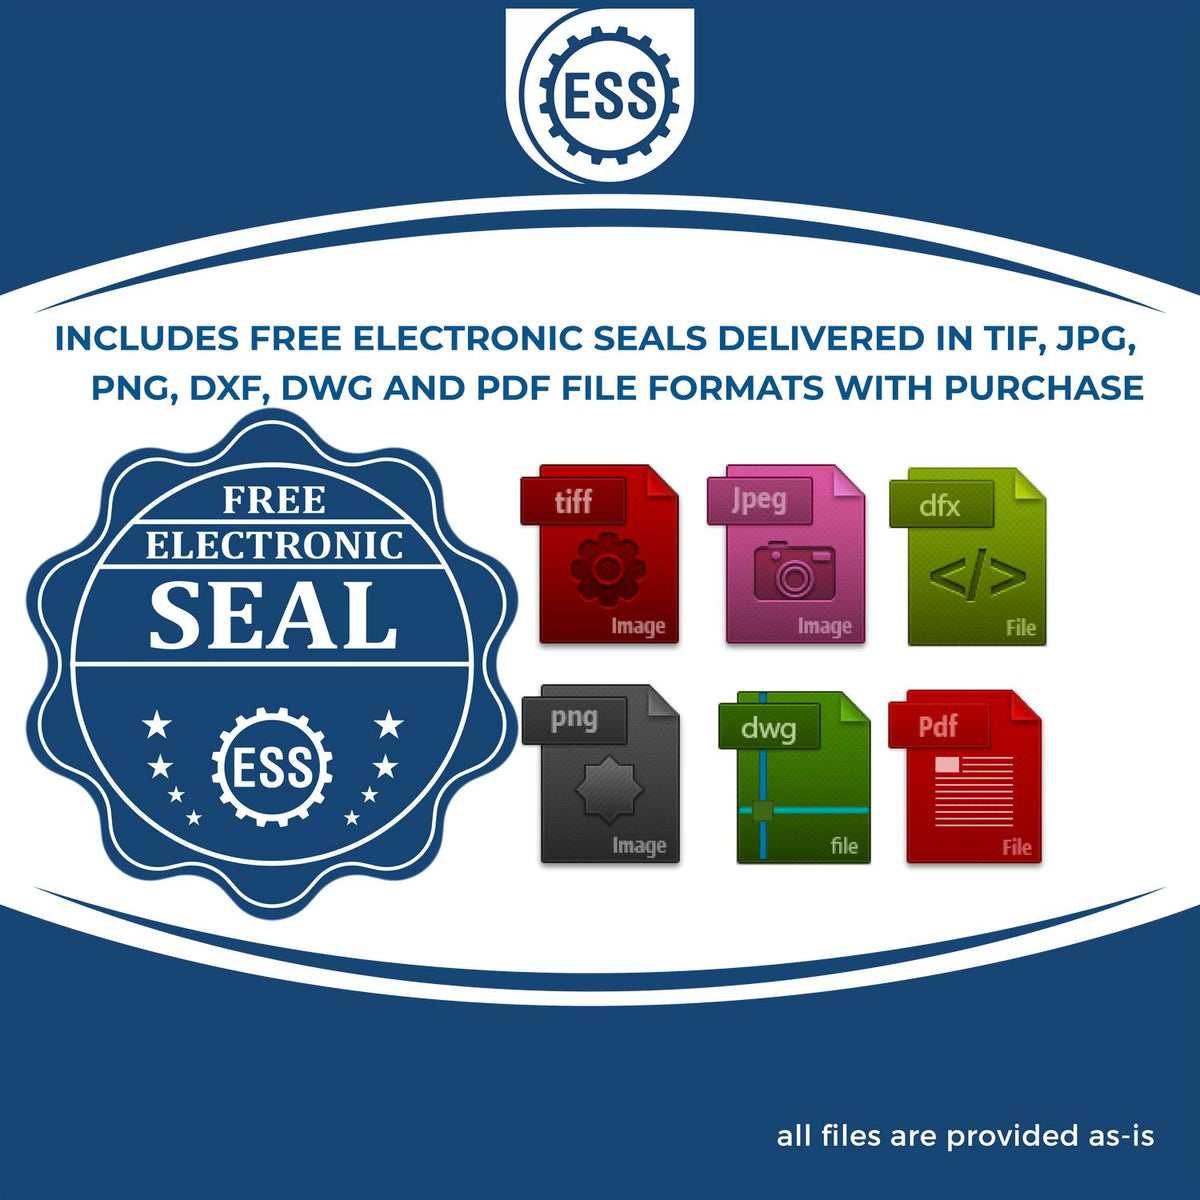 An infographic for the free electronic seal for the Hybrid Louisiana Engineer Seal illustrating the different file type icons such as DXF, DWG, TIF, JPG and PNG.